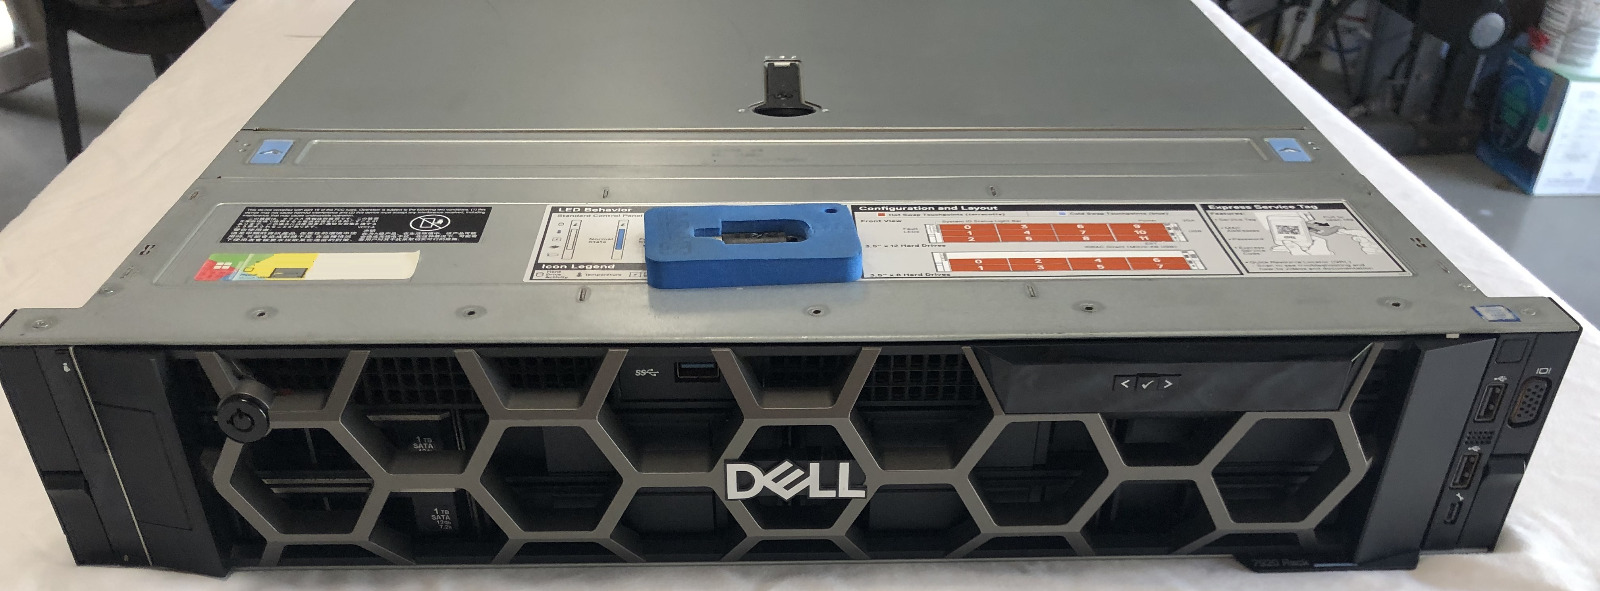 Dell Precision R7920 Workstation (PowerEdge R740 Chassis)